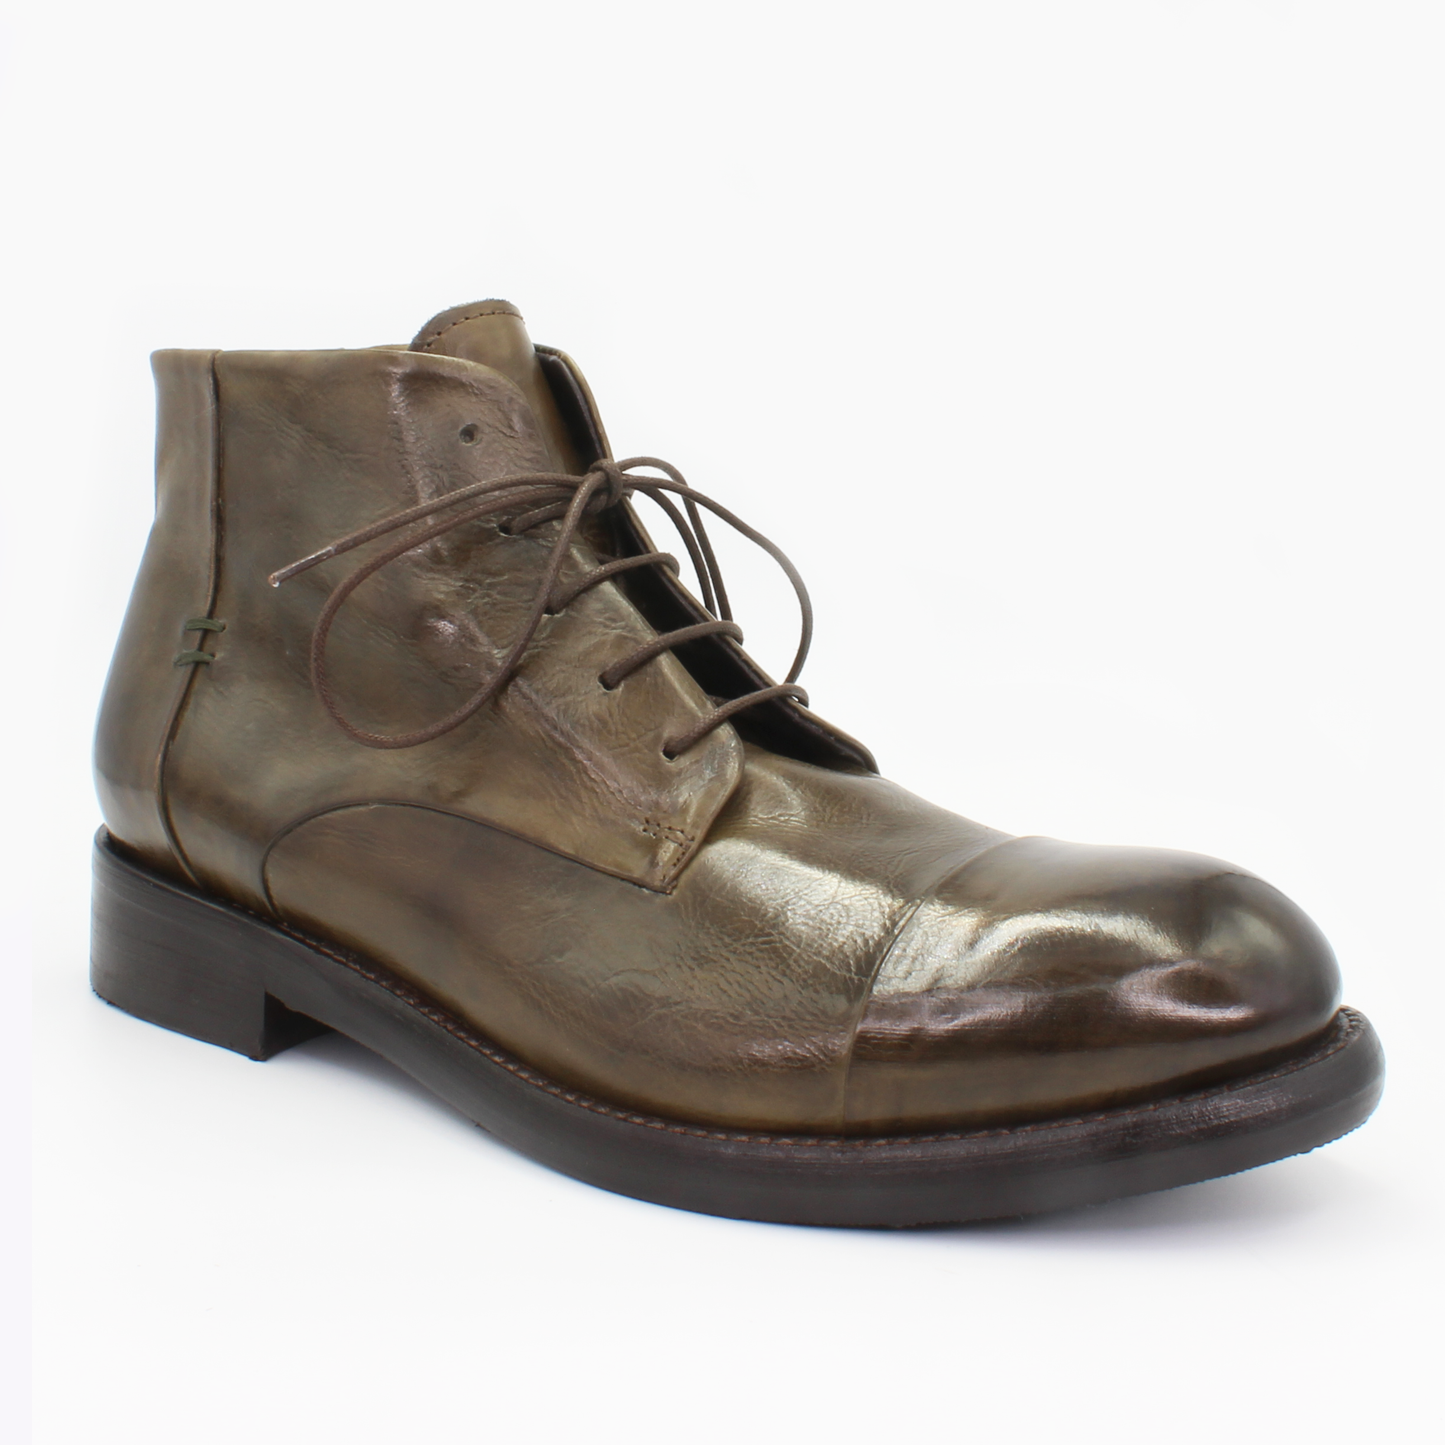 Shop Handmade Italian Leather Boot in Militare Green (JP36526/9) or browse our range of hand-made Italian boots for men in leather or suede in-store at Aliverti Cape Town, or shop online. We deliver in South Africa & offer multiple payment plans as well as accept multiple safe & secure payment methods.